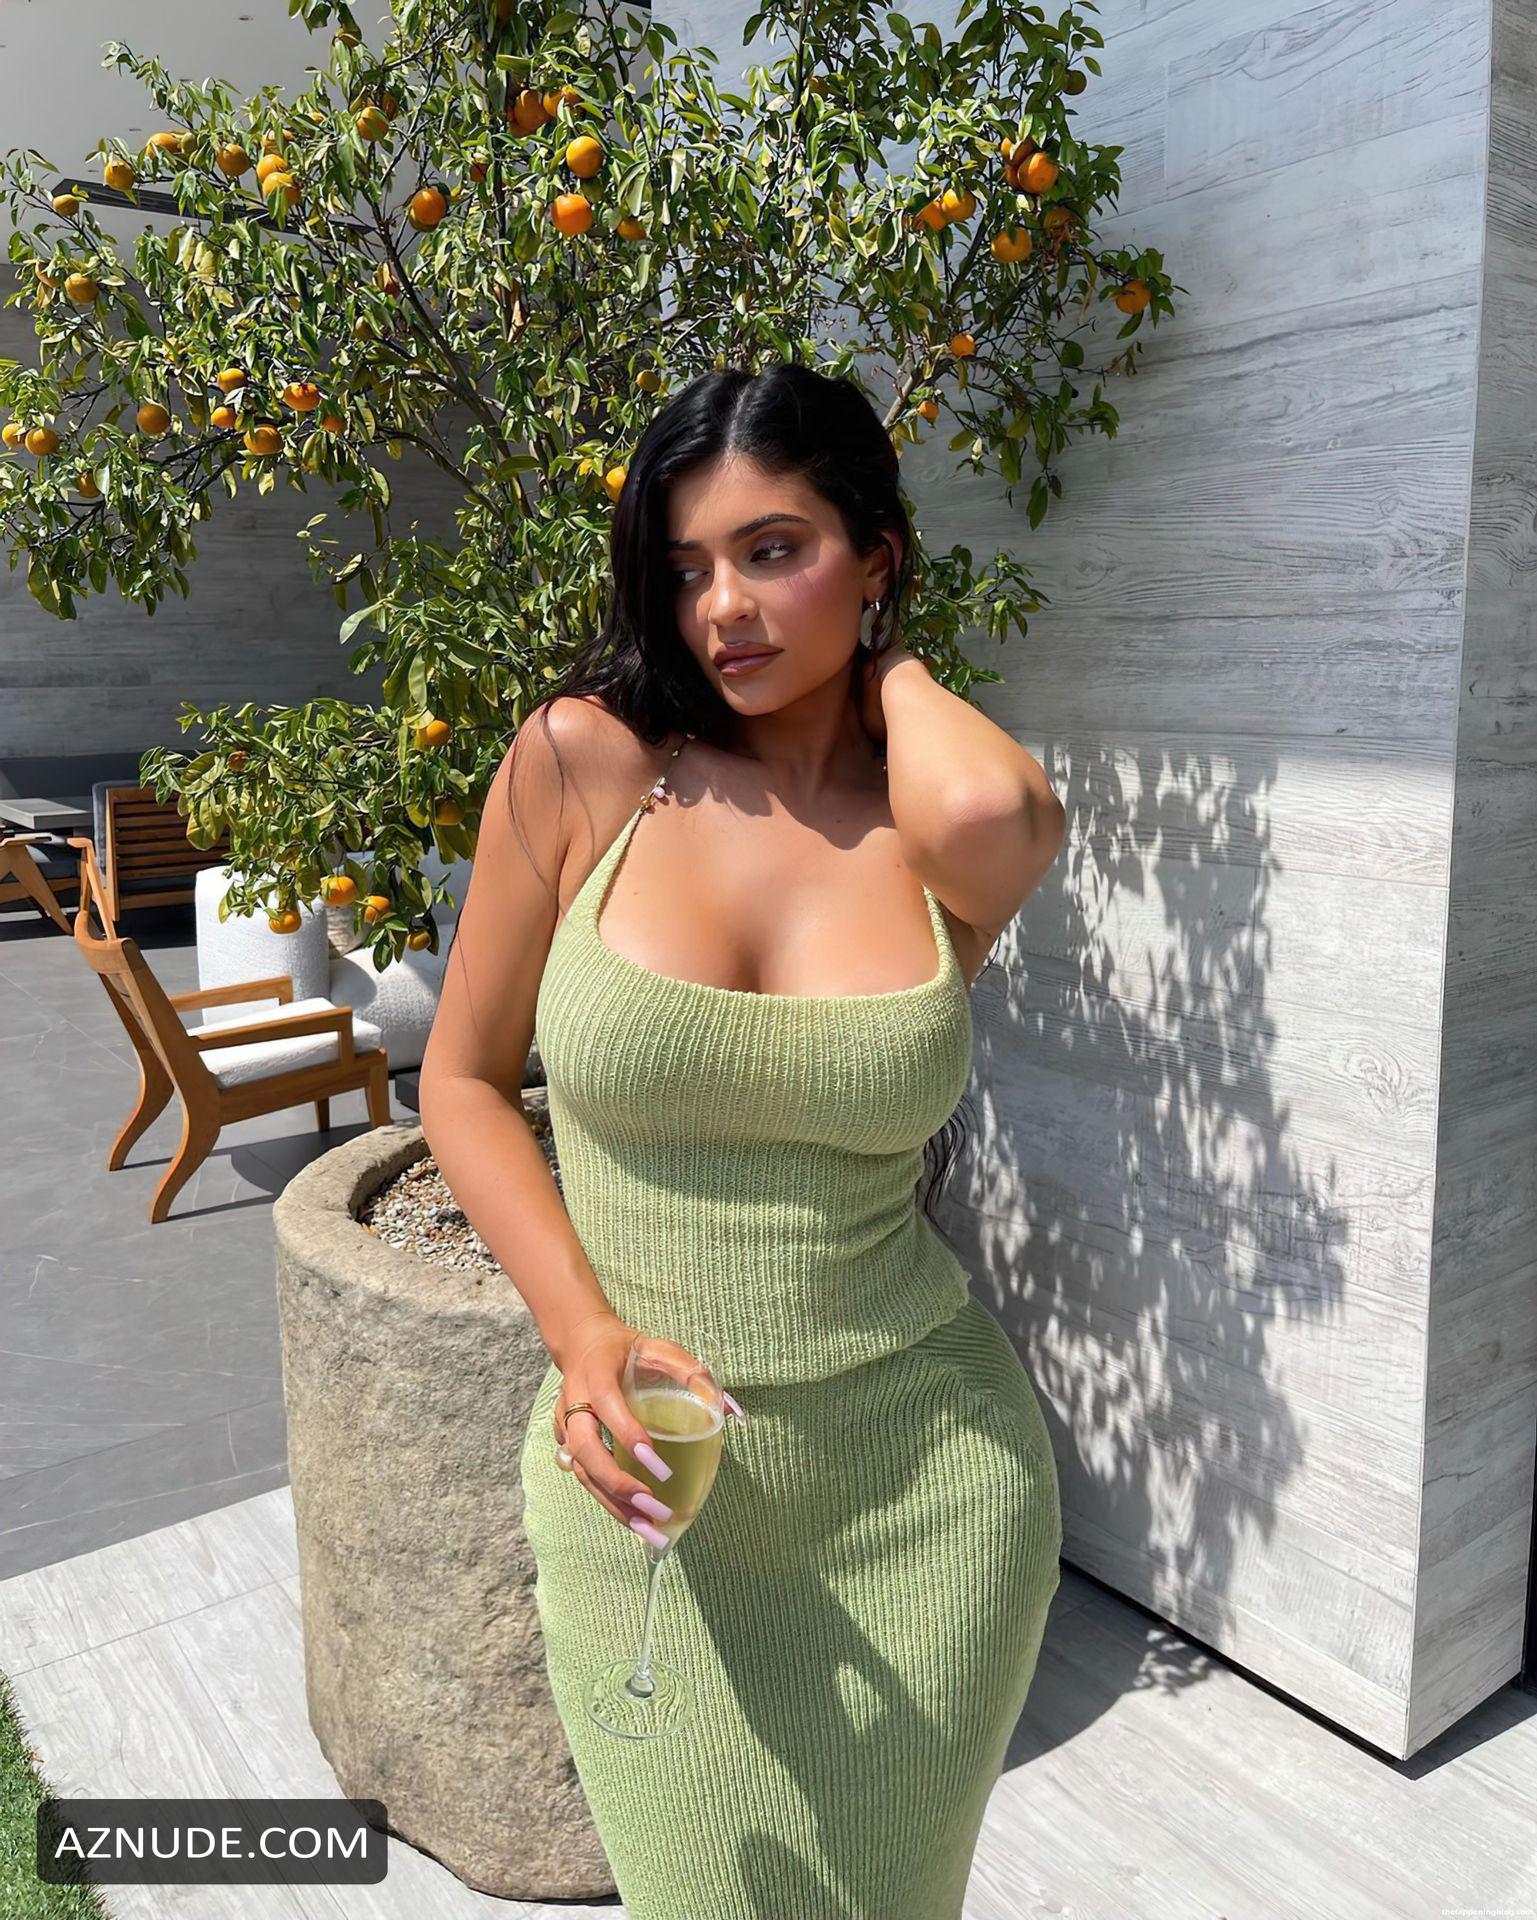 Kylie Jenner Sexy Shows Off Fake Boobs And Booty Wearing A Tight Dress In Social Media